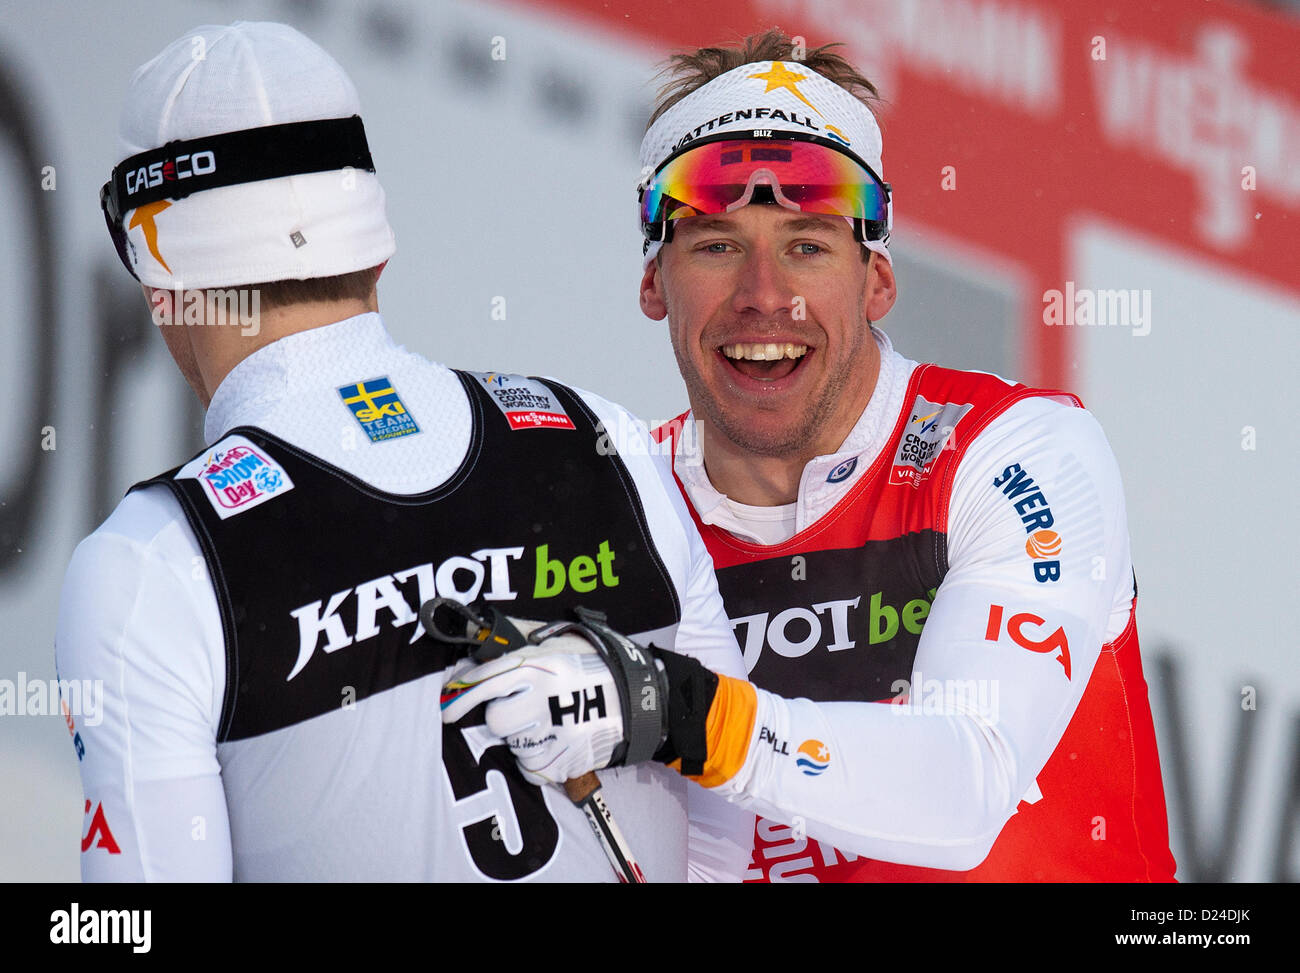 FIS Cross-Country Skiing World Cup, 2012-13, Teodor Peterson from Sweden (left) won sprint in classic style, men, in Liberec, Czech Republic, January 12, 2013. Second placed was Emil Jonsson from Sweden. (CTK Photo/Radek Petrasek) Stock Photo